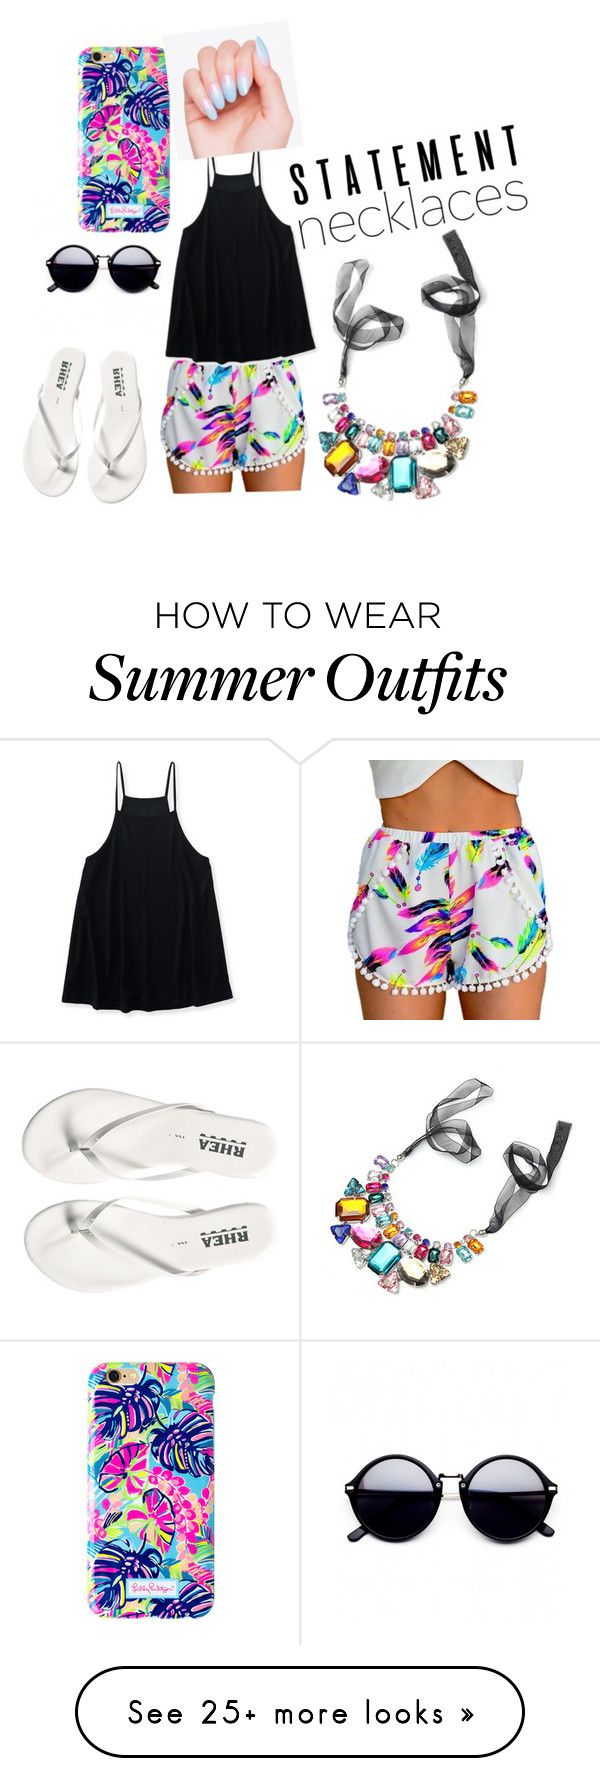 "Total date night look or summer day outfit" by mjeankuhn on Polyvore ...